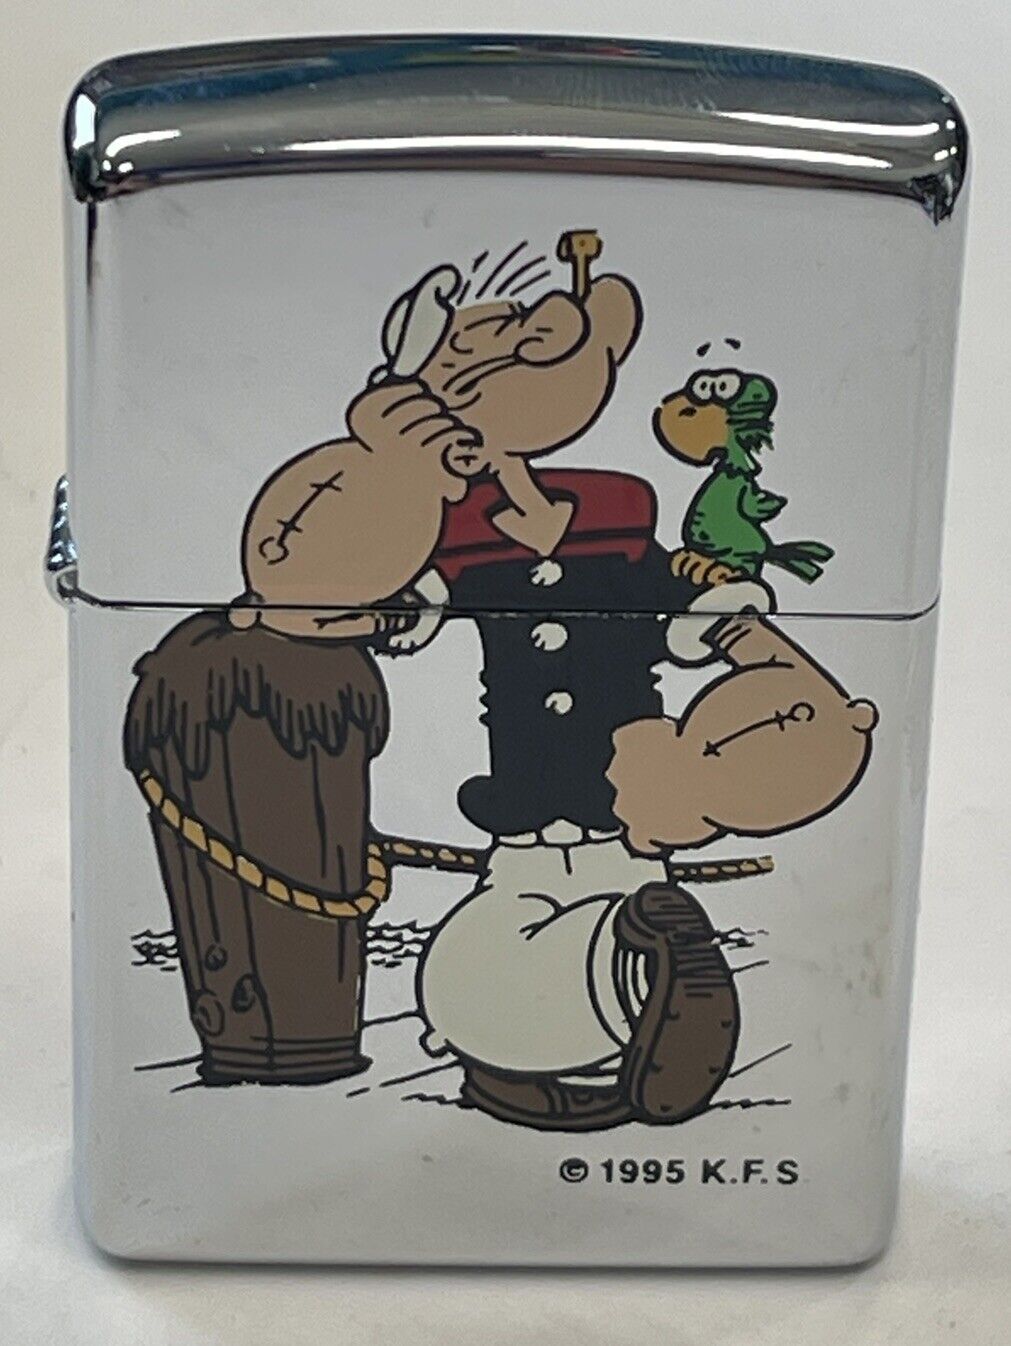 ZIPPO 1995 POPEYE & PARROT POLISHED CHROME LIGHTER SEALED IN BOX 91S